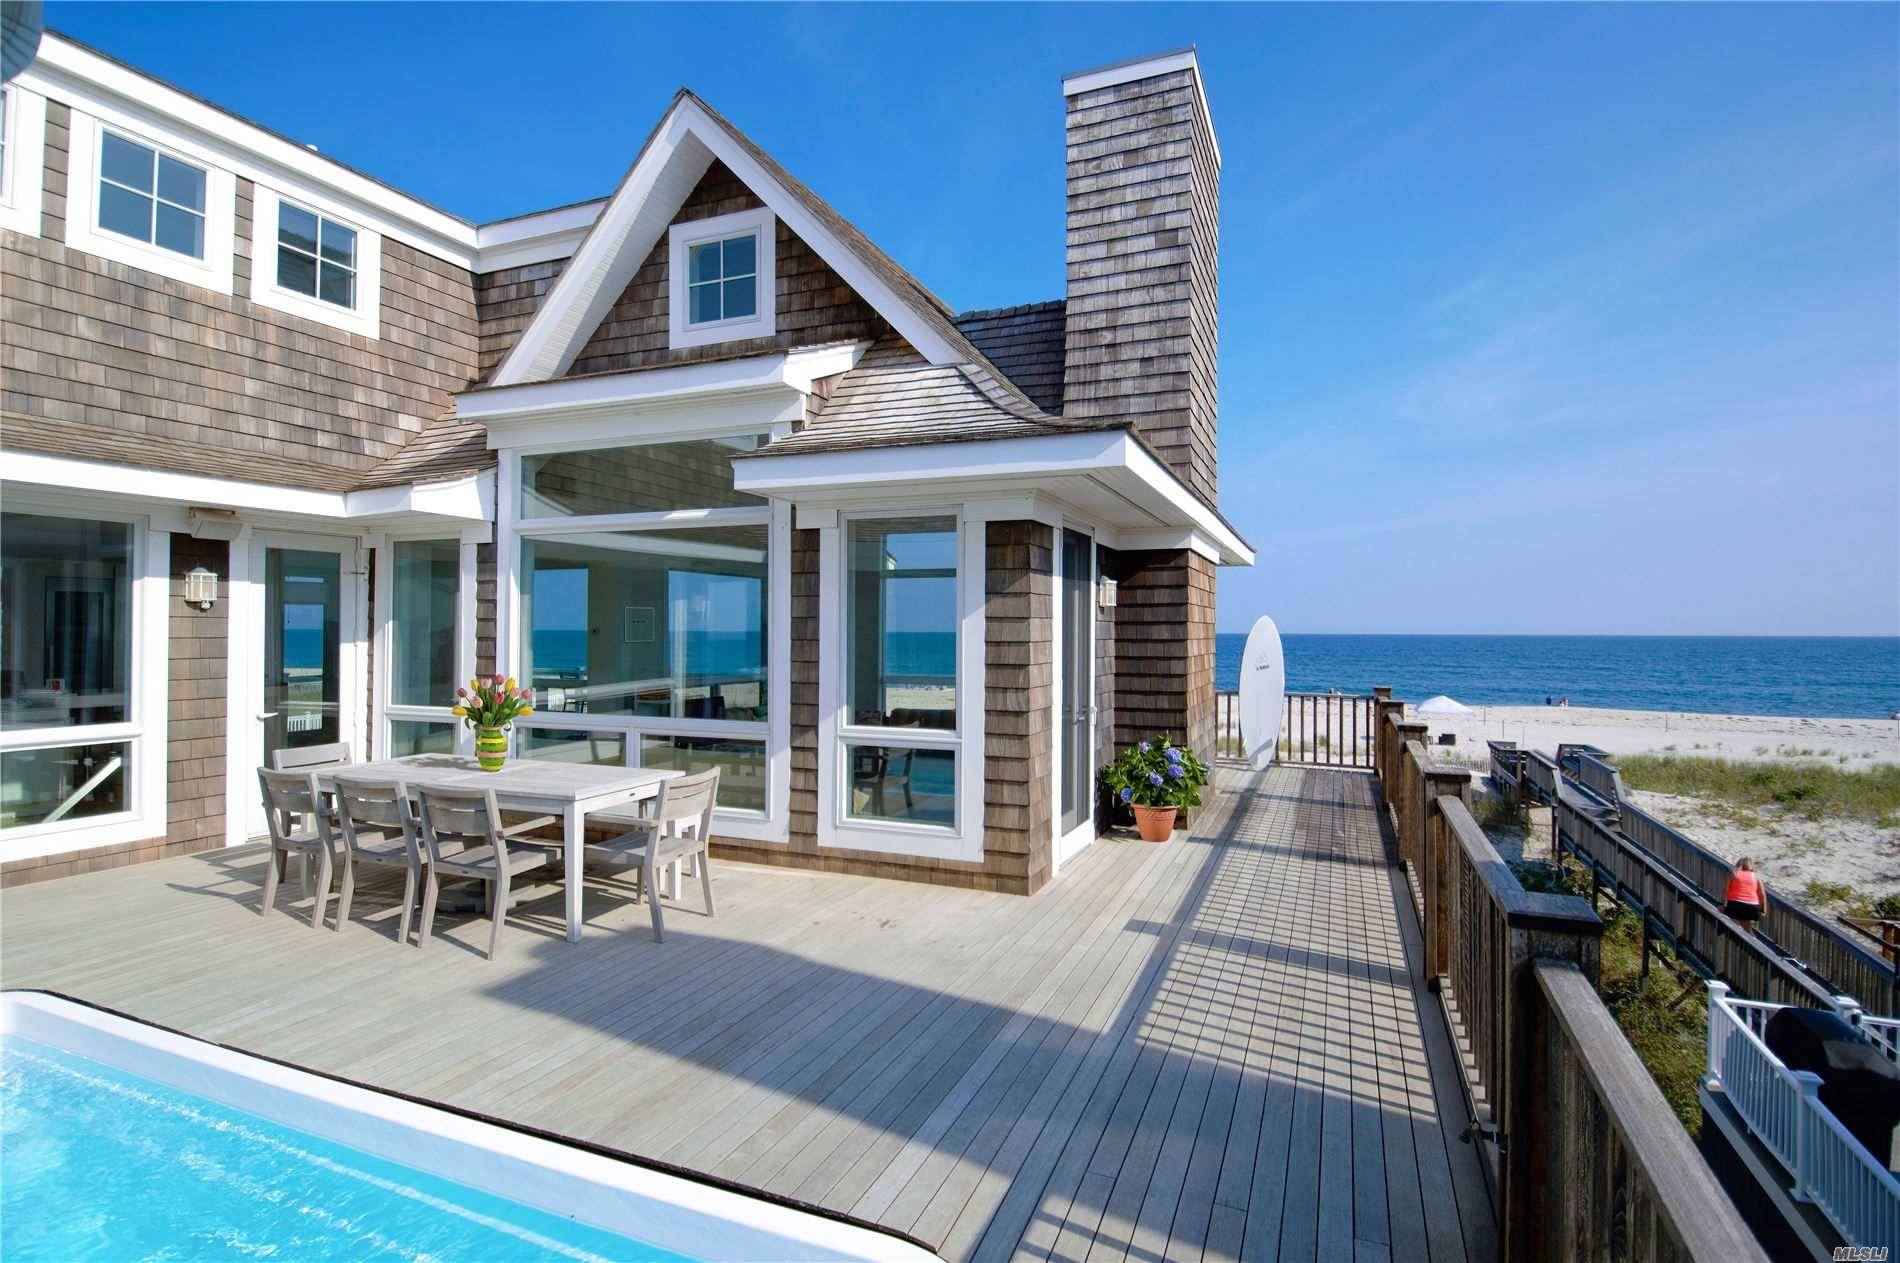 The ultimate beach house featuring 4 bedrooms and 4.